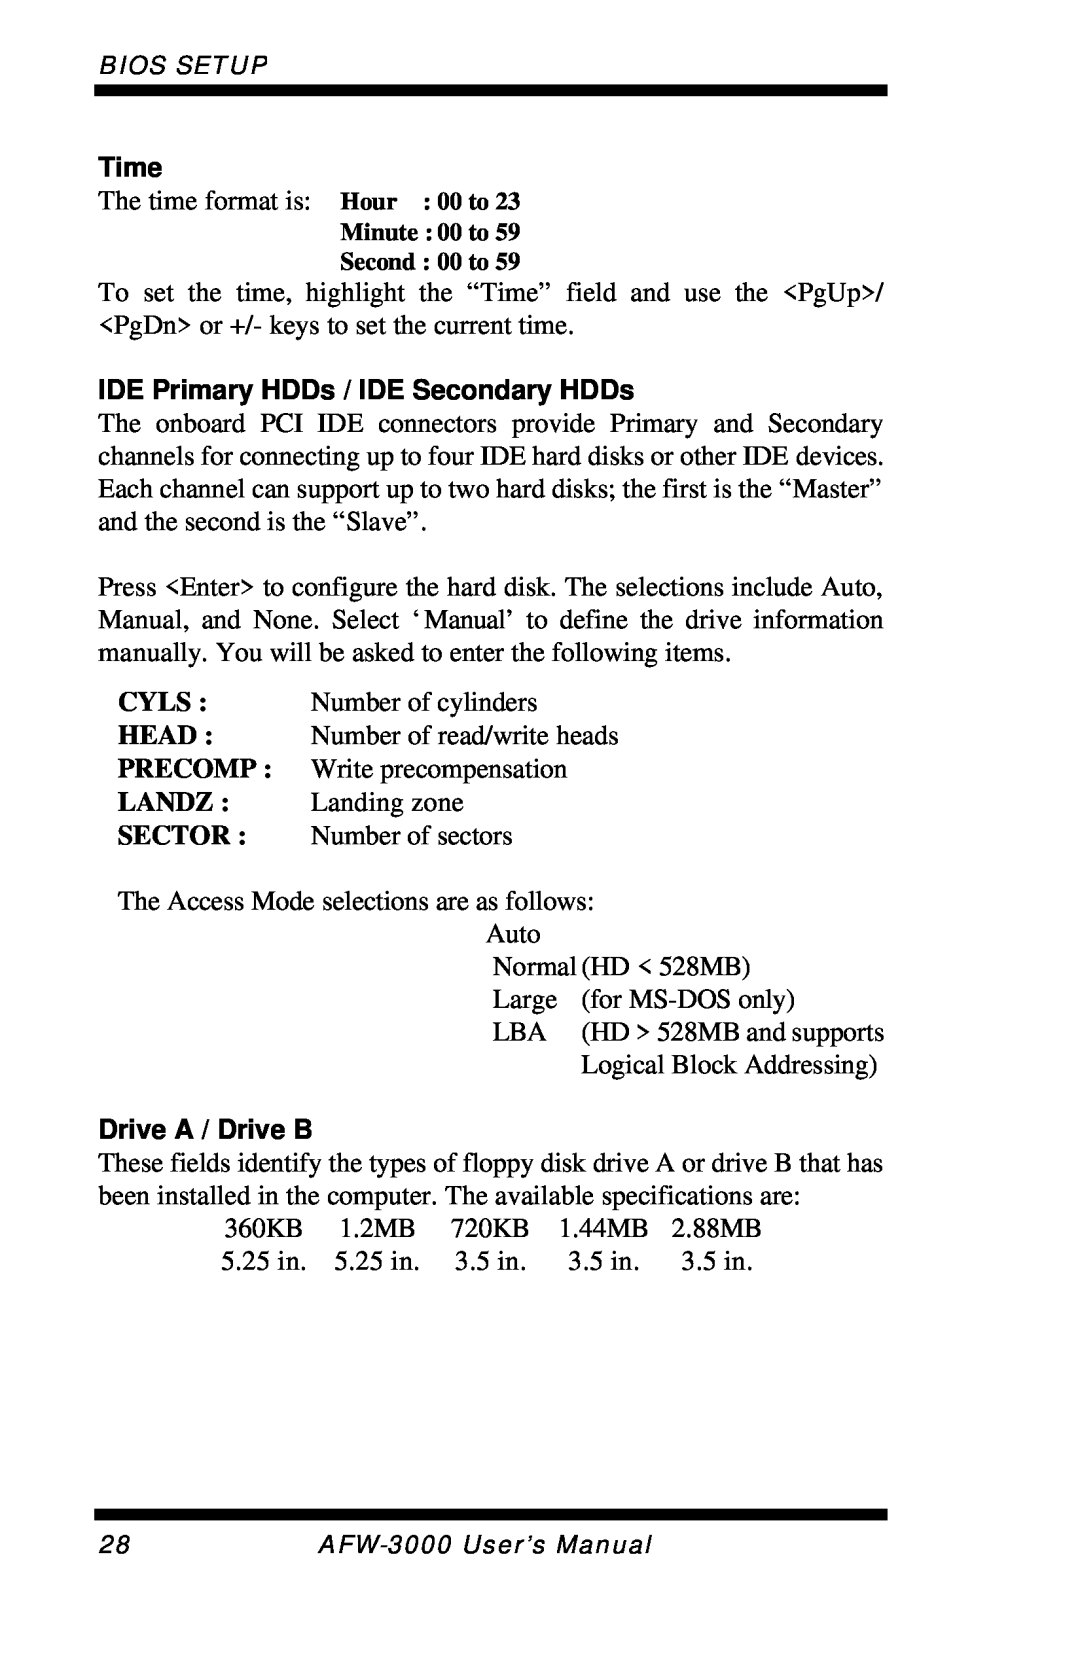 Intel E7501 user manual Time, IDE Primary HDDs / IDE Secondary HDDs, Drive A / Drive B 